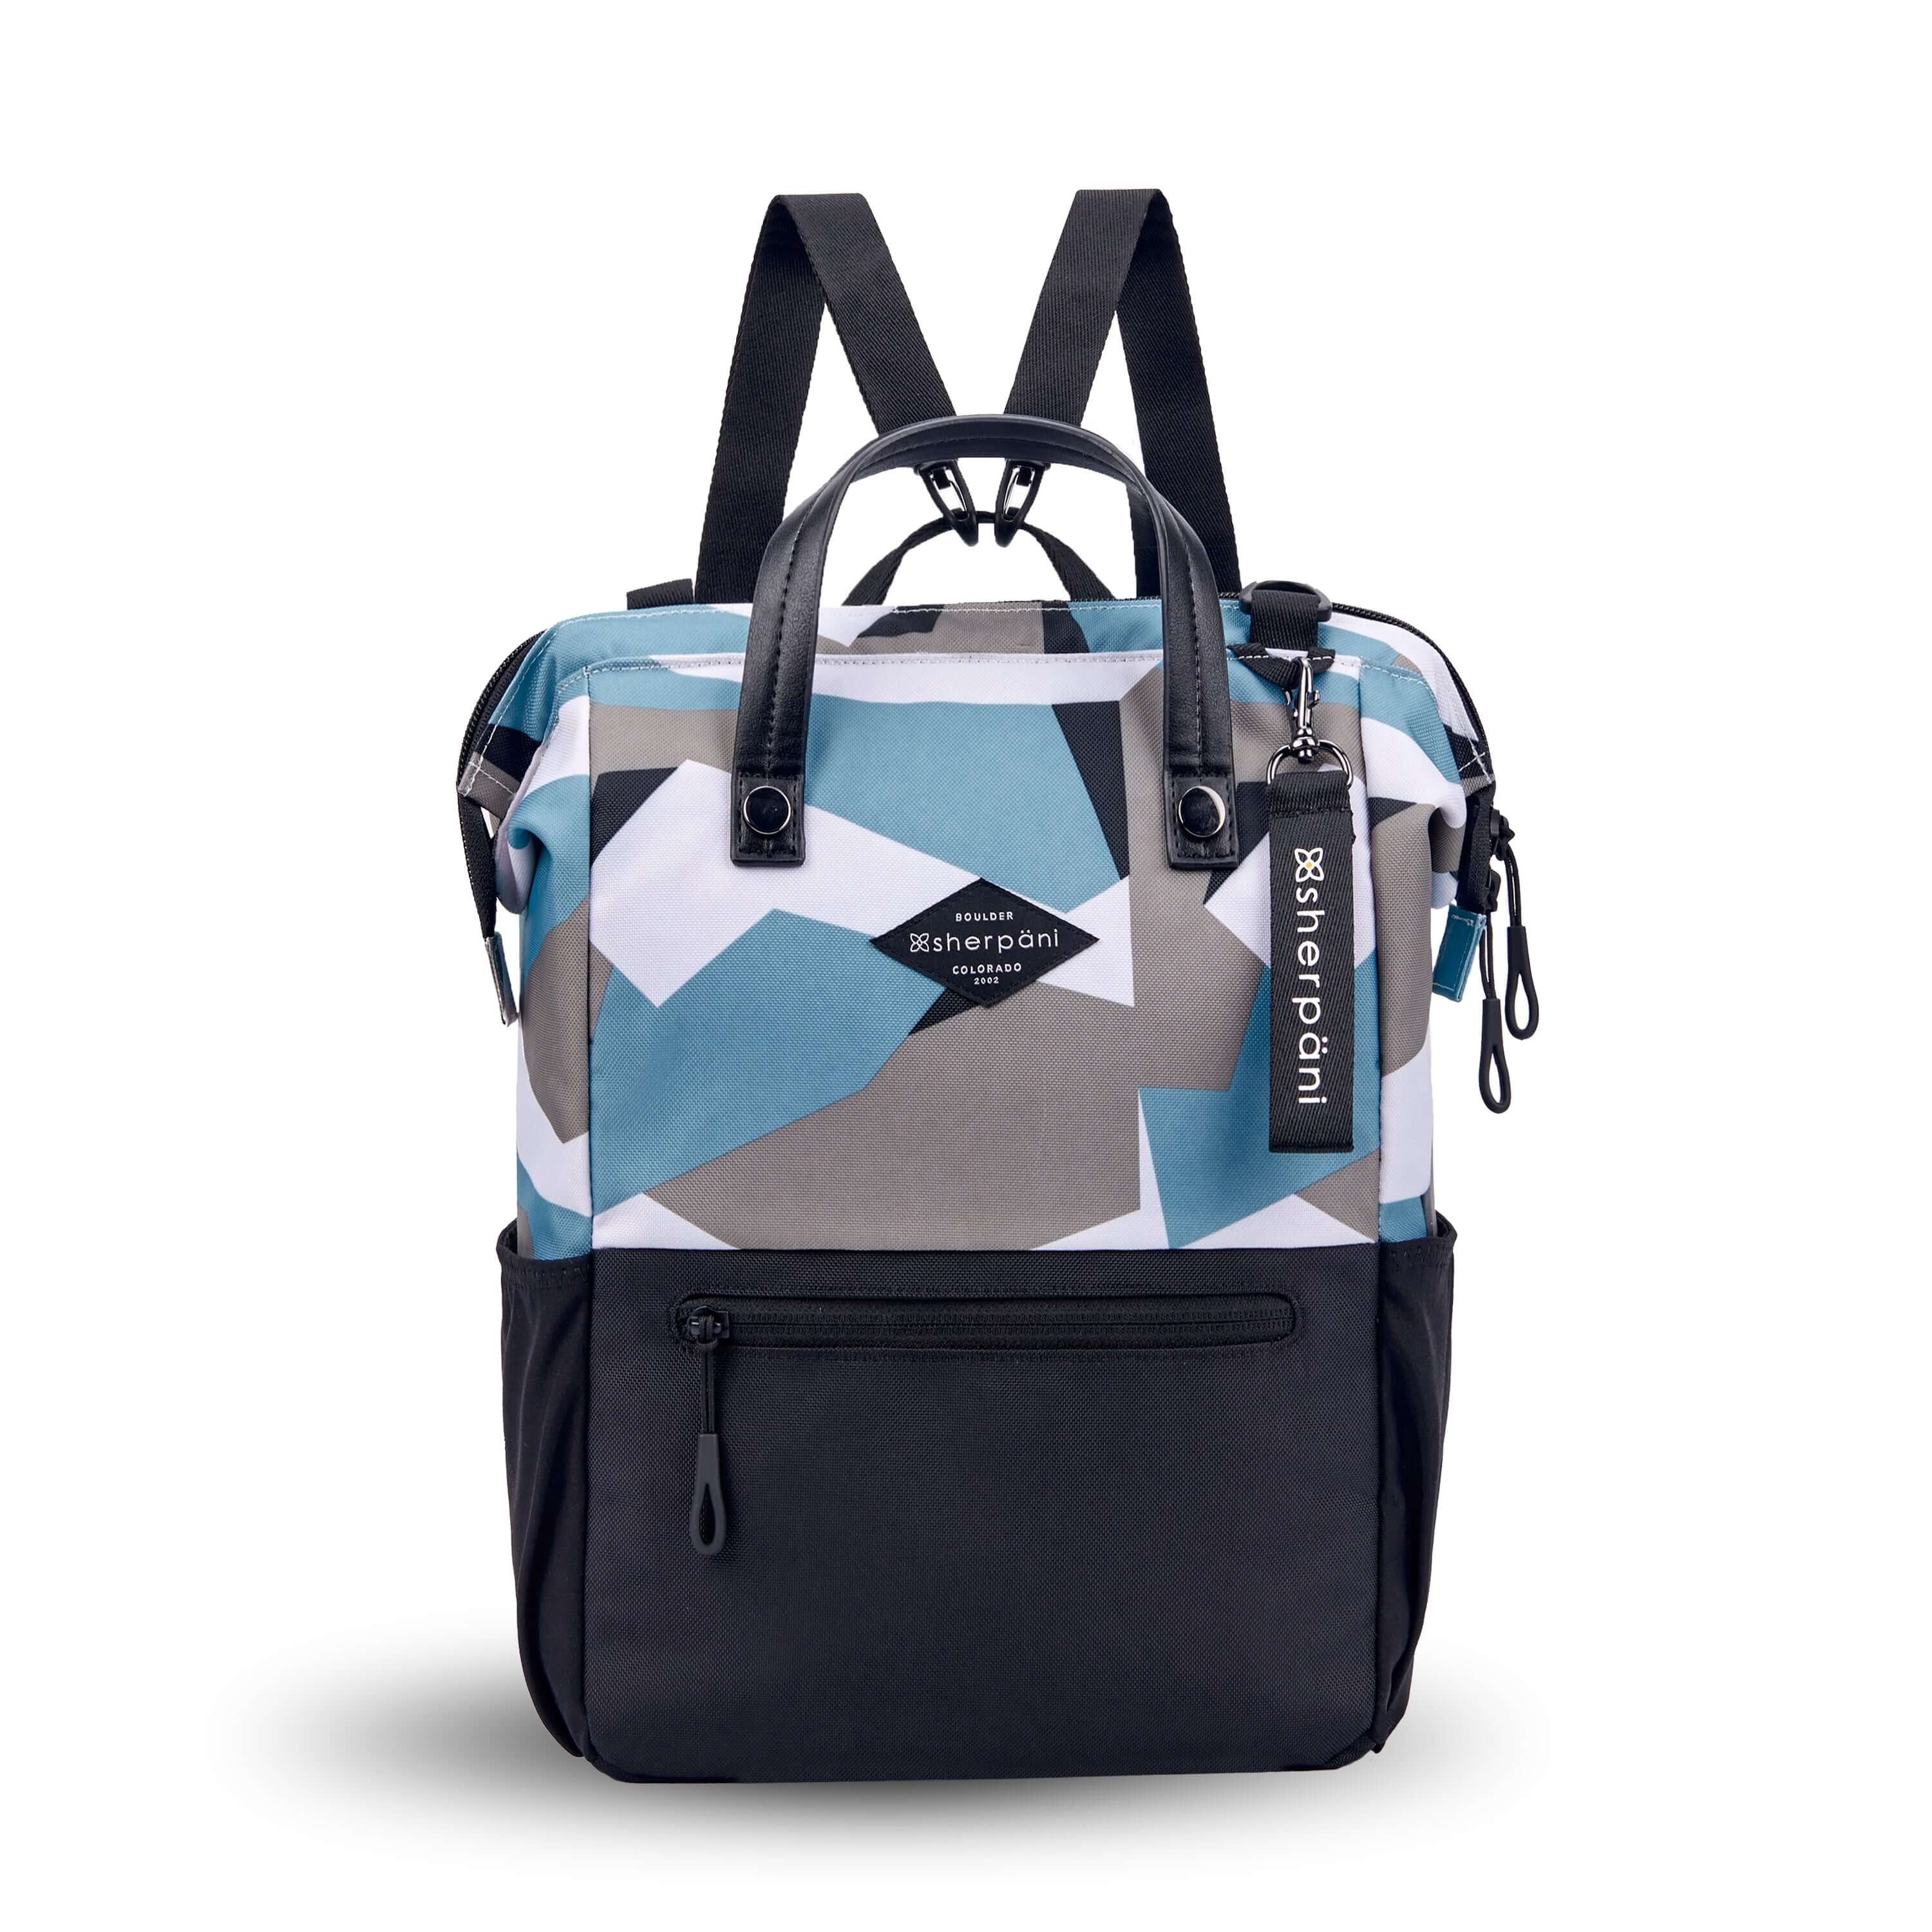 Flat front view of Sherpani three-in-one bag, the Dispatch in Summer Camo. The bag is two-toned: the top is a camouflage pattern of light blue, gray and white, the bottom is black. There is an external zipper pocket on the front panel. Easy-pull zippers are accented in black. A branded Sherpani keychain is clipped to the upper right corner. Elastic water bottle holders sit on either side of the bag. It has short tote handles and adjustable/detachable straps that can function for a backpack or crossbody.